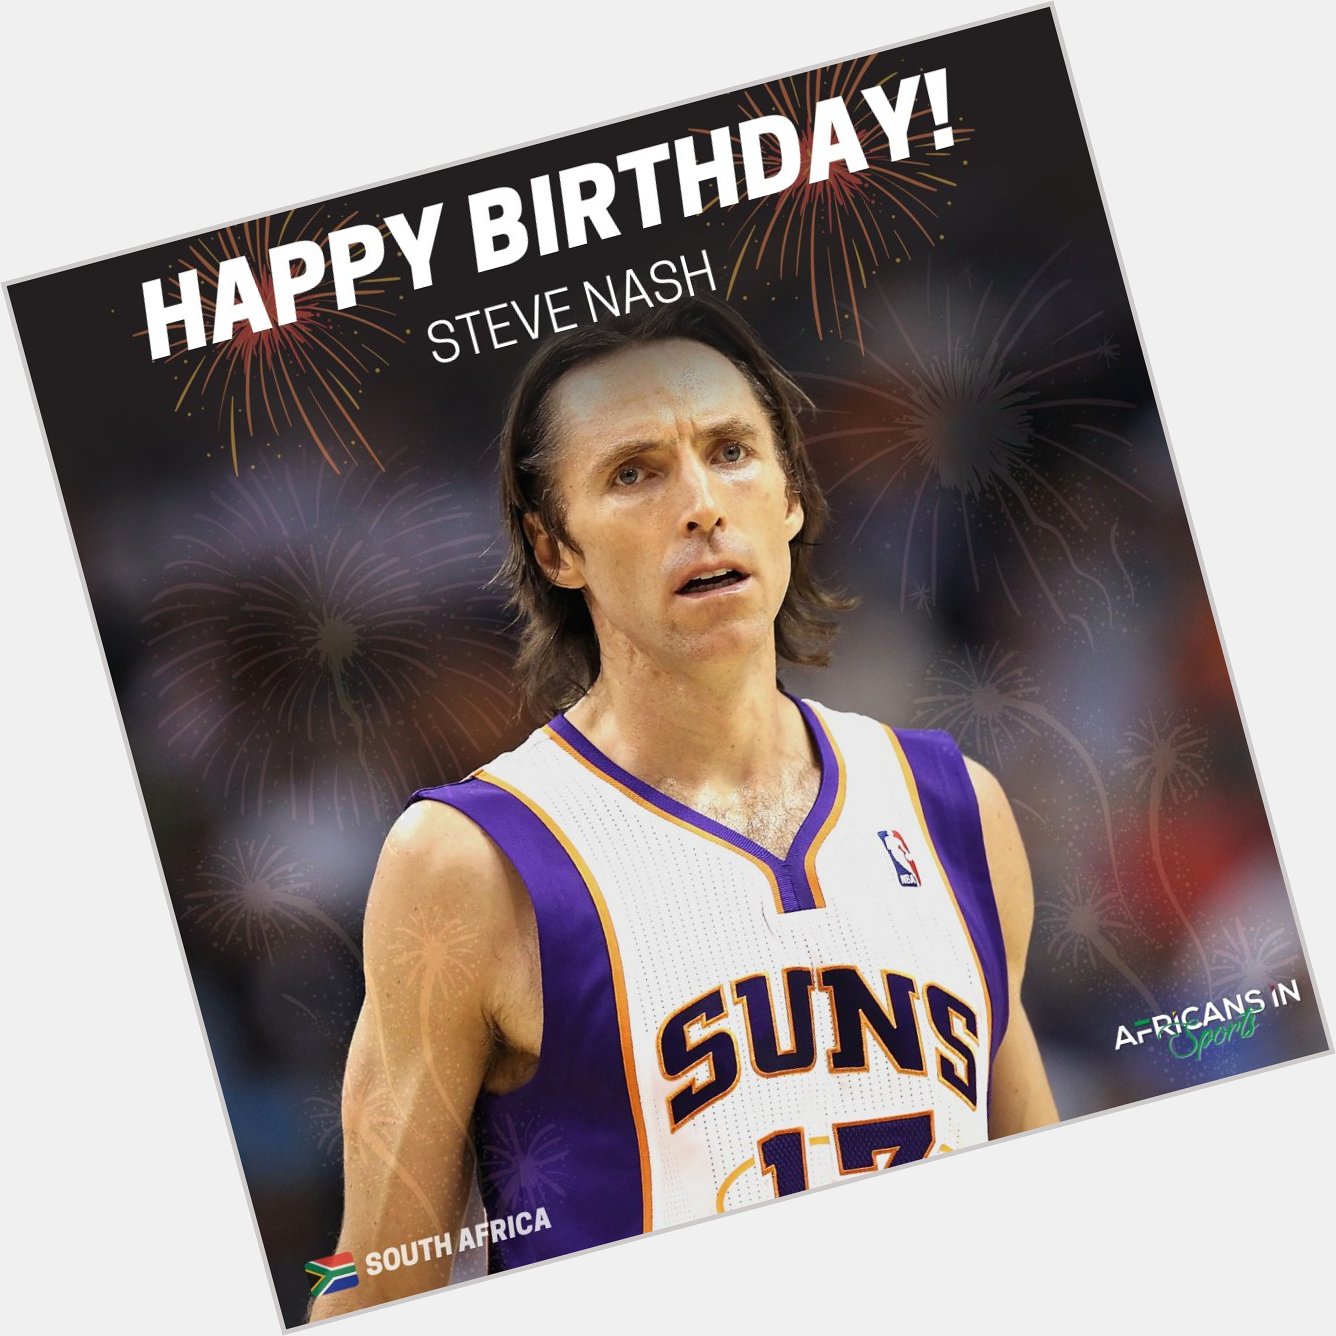 Happy birthday to Professional Basketball player, Steve Nash  -
Send him some love via the comment section 